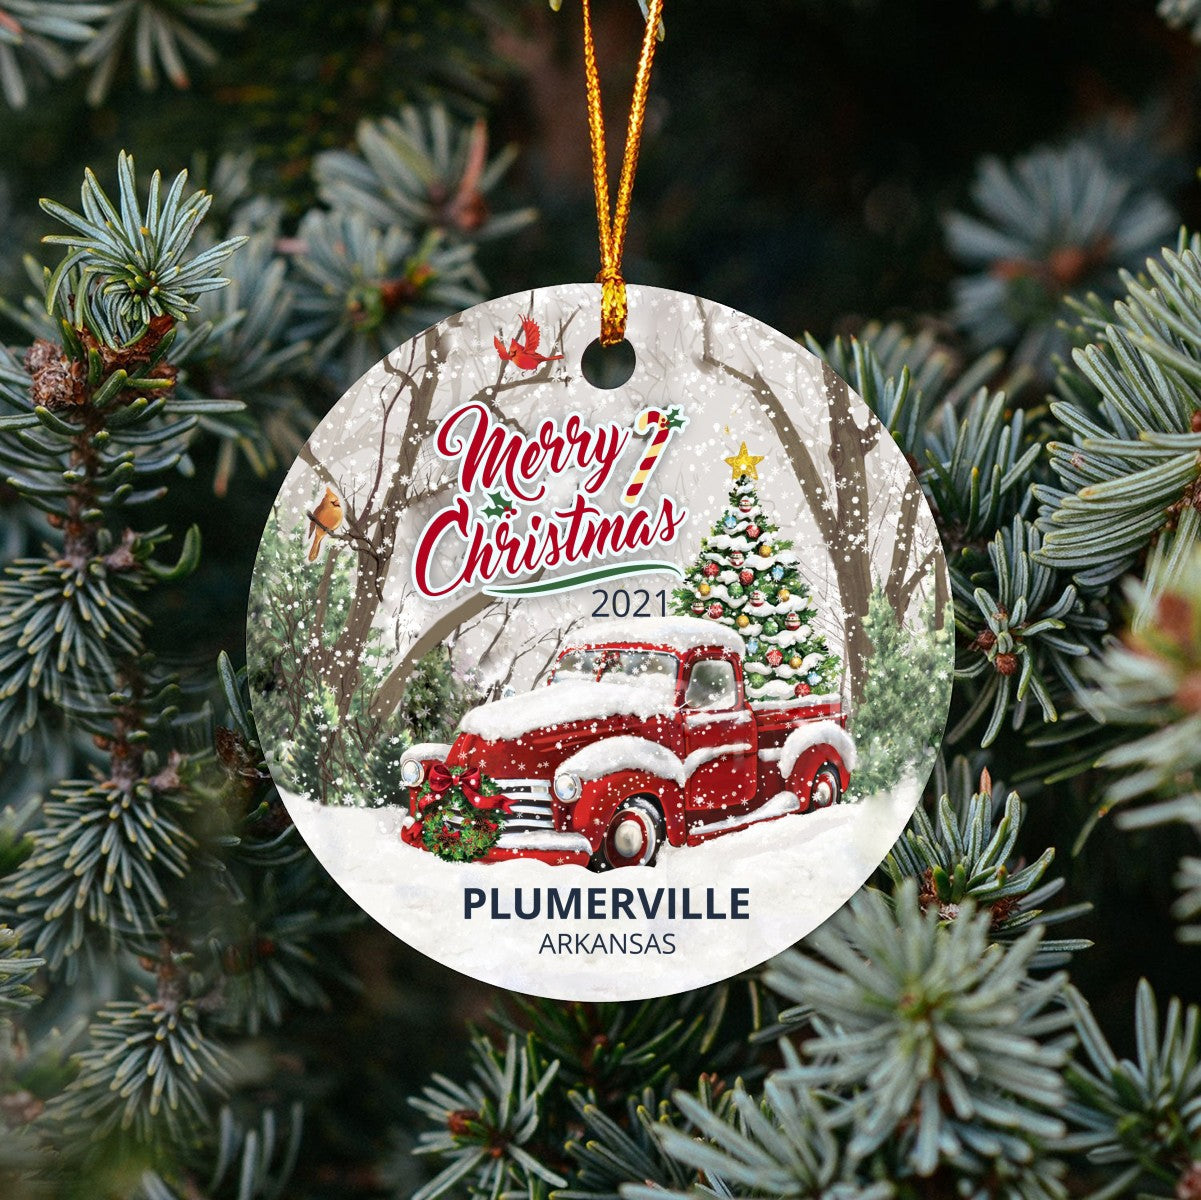 Christmas Tree Ornaments Plumerville - Ornament With Name City, State Plumerville Arkansas AR Ornament - Red Truck Xmas Ornaments 3'' Plastic Gift For Family, Friend And Housewarming